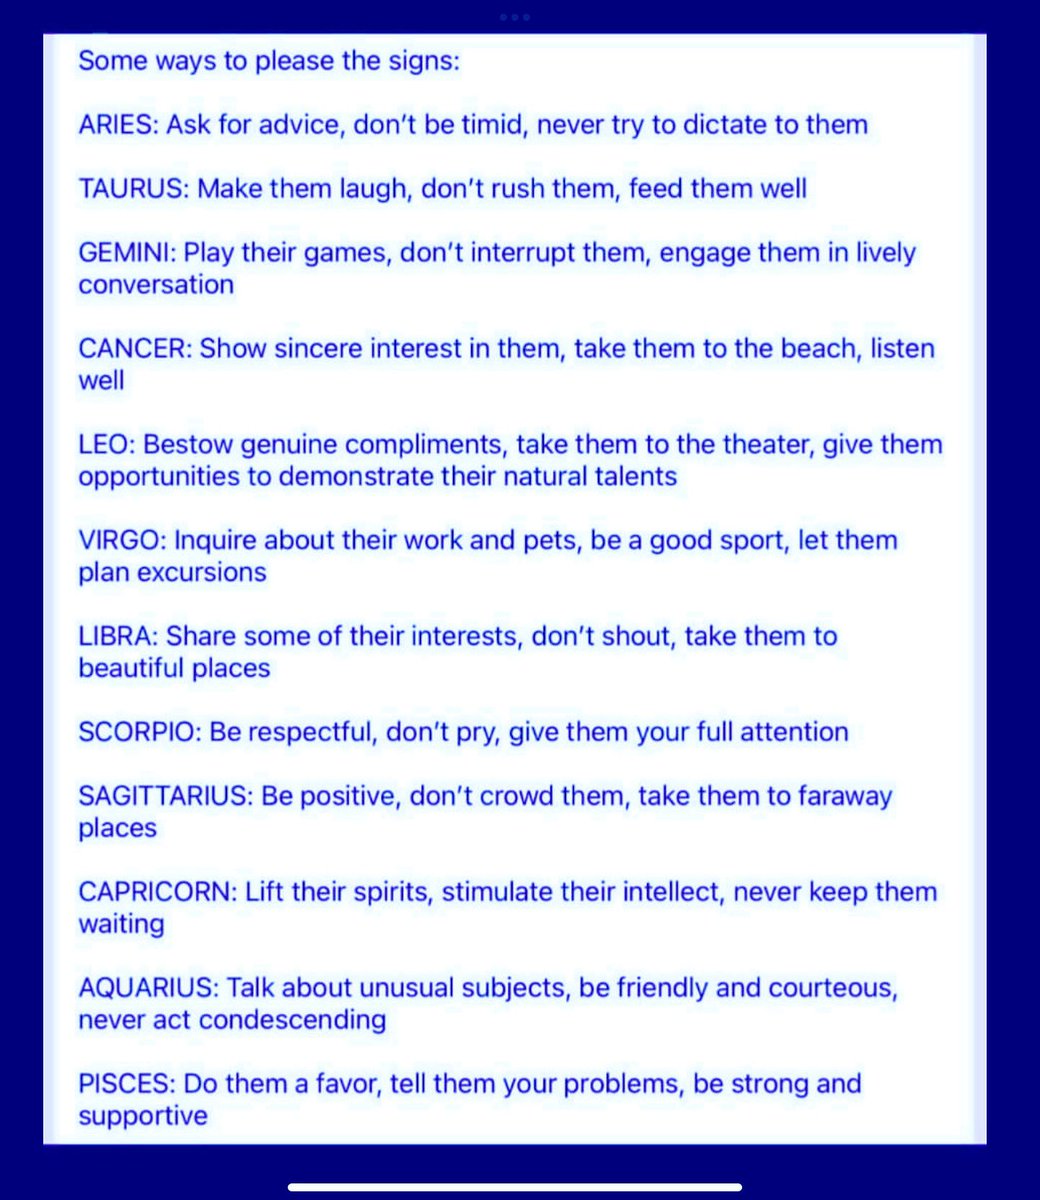 #astrology #astrologicalsigns #zodiacsigns #zodiac #astrologer